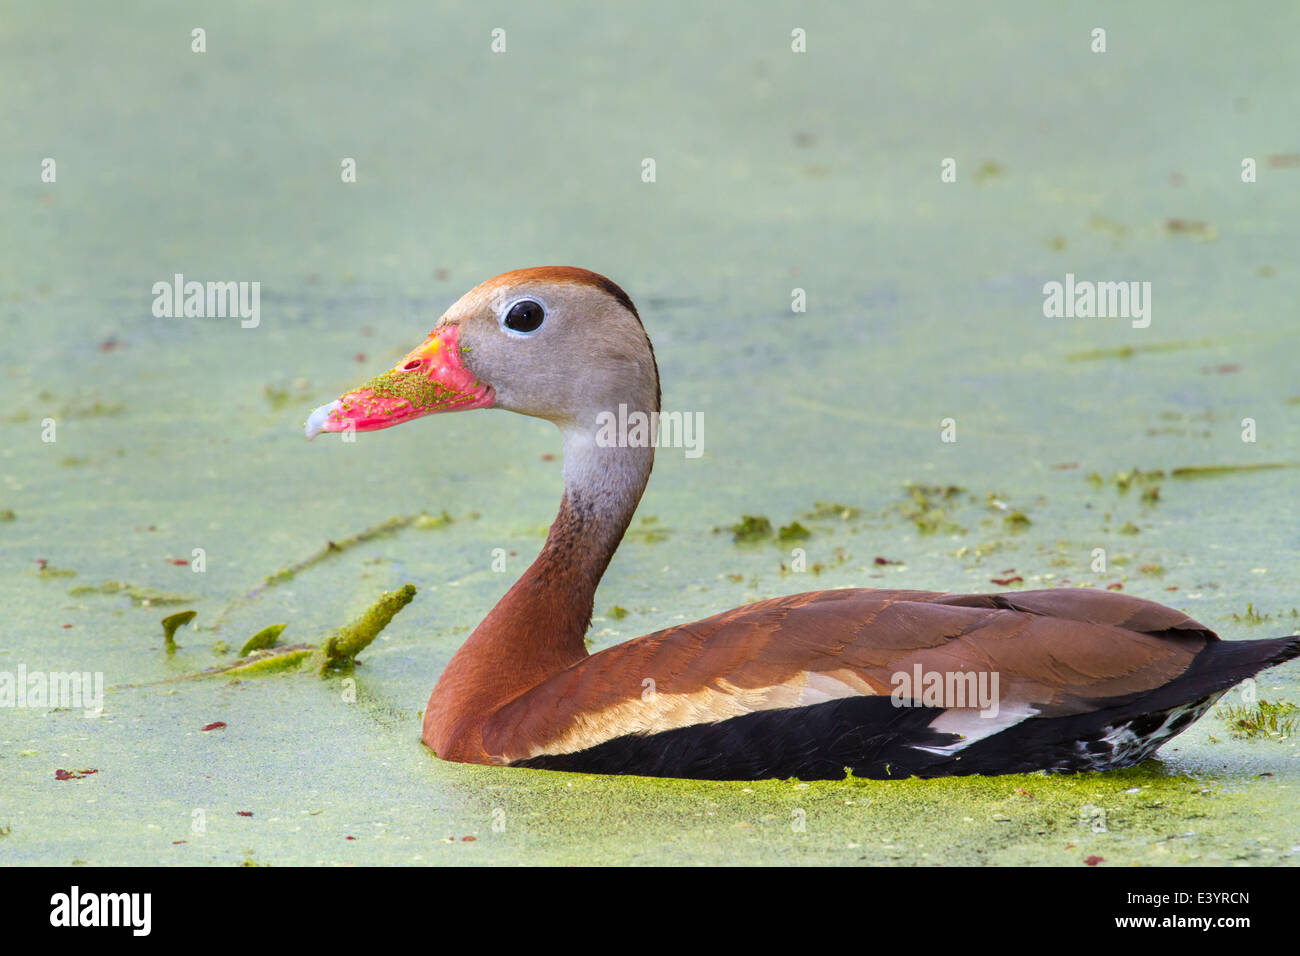 Black-bellied whistling duck (Dendrocygna autumnalis) in a swamp covered with duckweed. Stock Photo